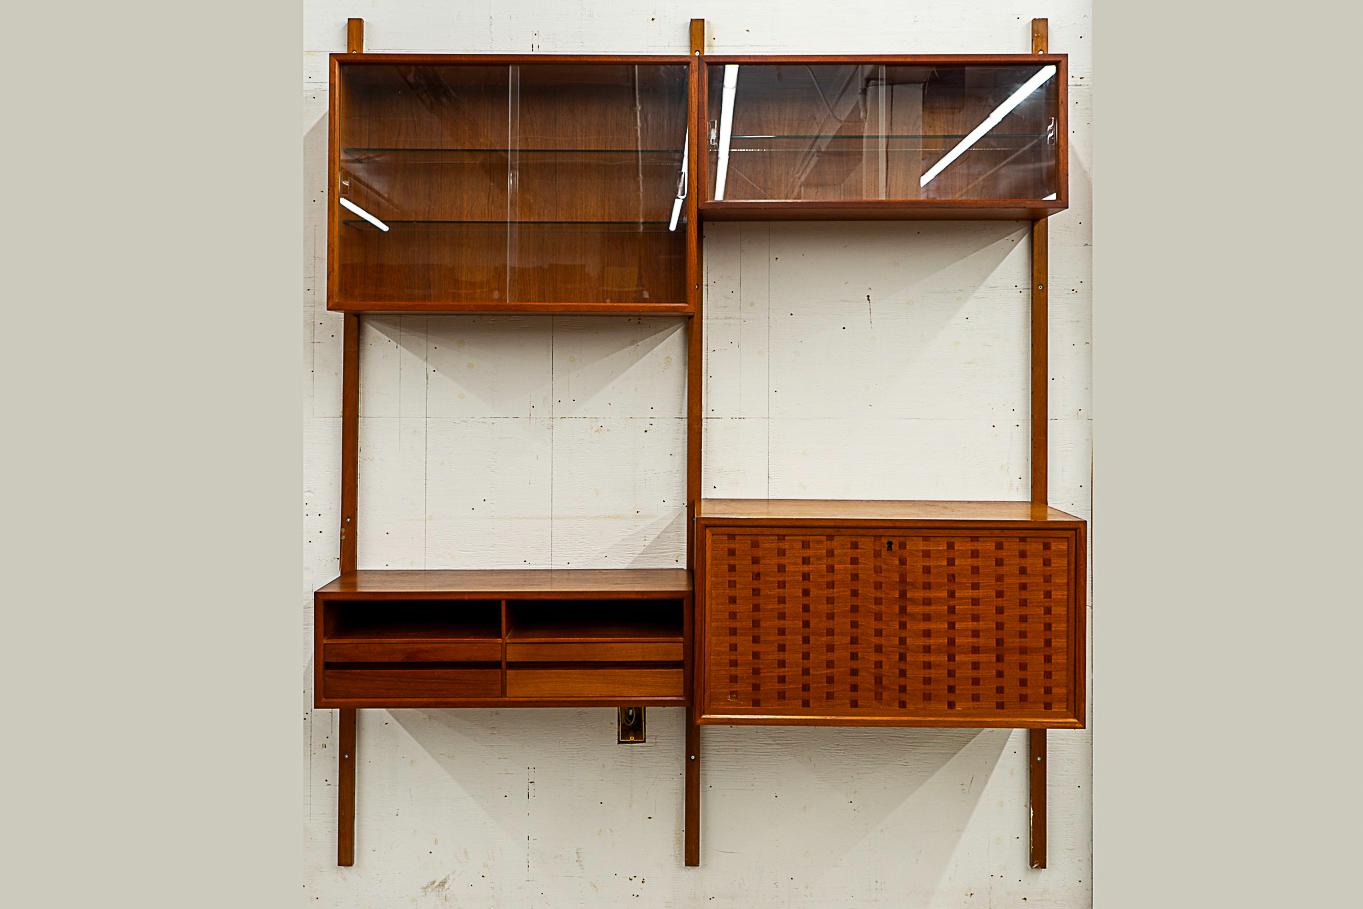 Teak 'Royal' wall system by Poul Cadovius, circa 1960's. This fantastic wall system features solid wood trim with stunning book-matched veneer on surfaces and shows dovetail construction. Modular cabinetry and shelving, a versatile storage solution!